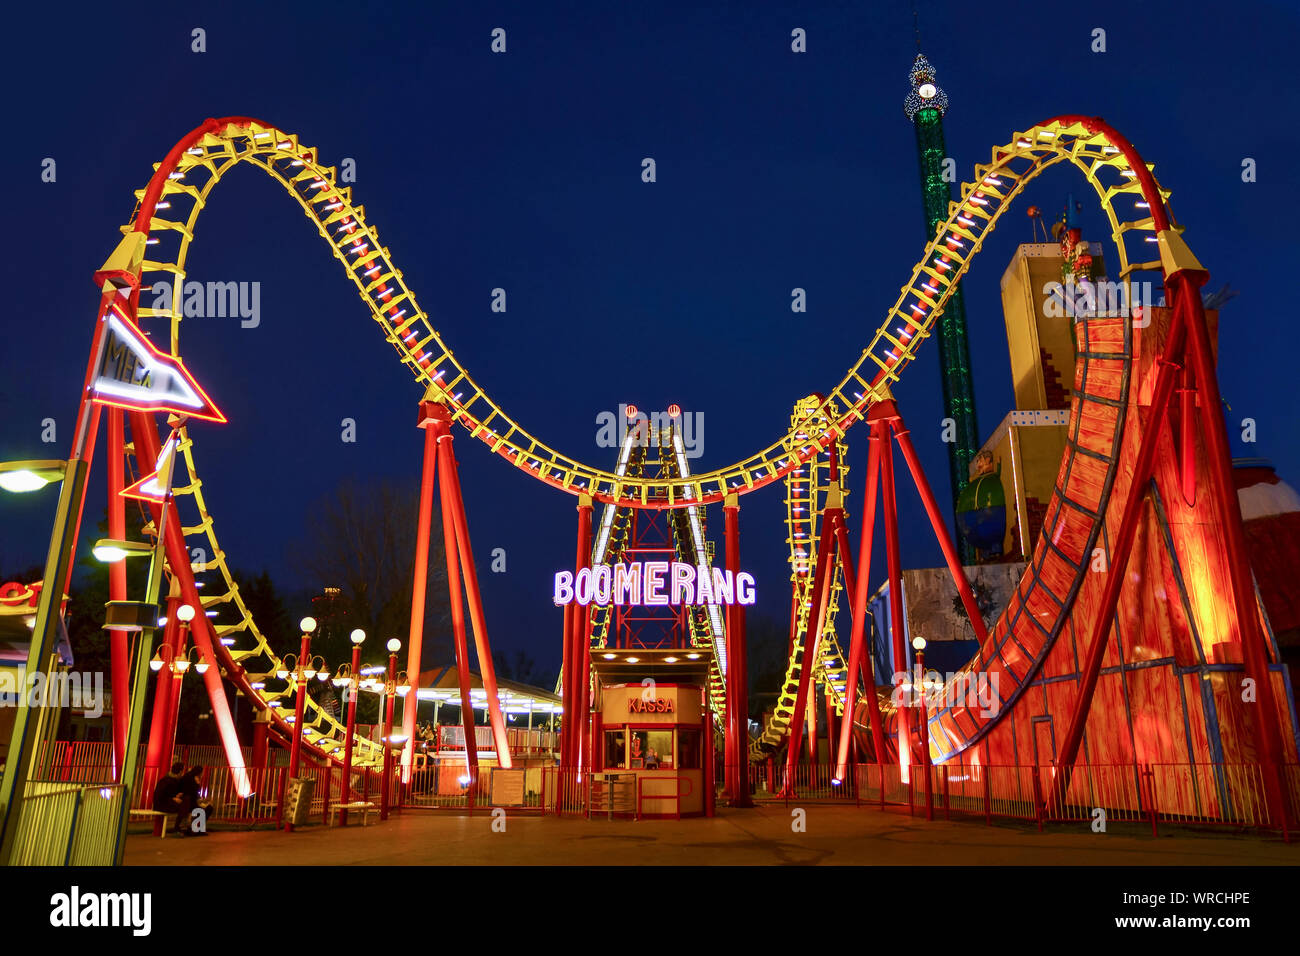 VIENNA, AUSTRIA - MARCH 8,2014:  The BOOMERANG roller coaster at night in Wurstelprater, an amusement park and section of the Wiener Prater. Stock Photo